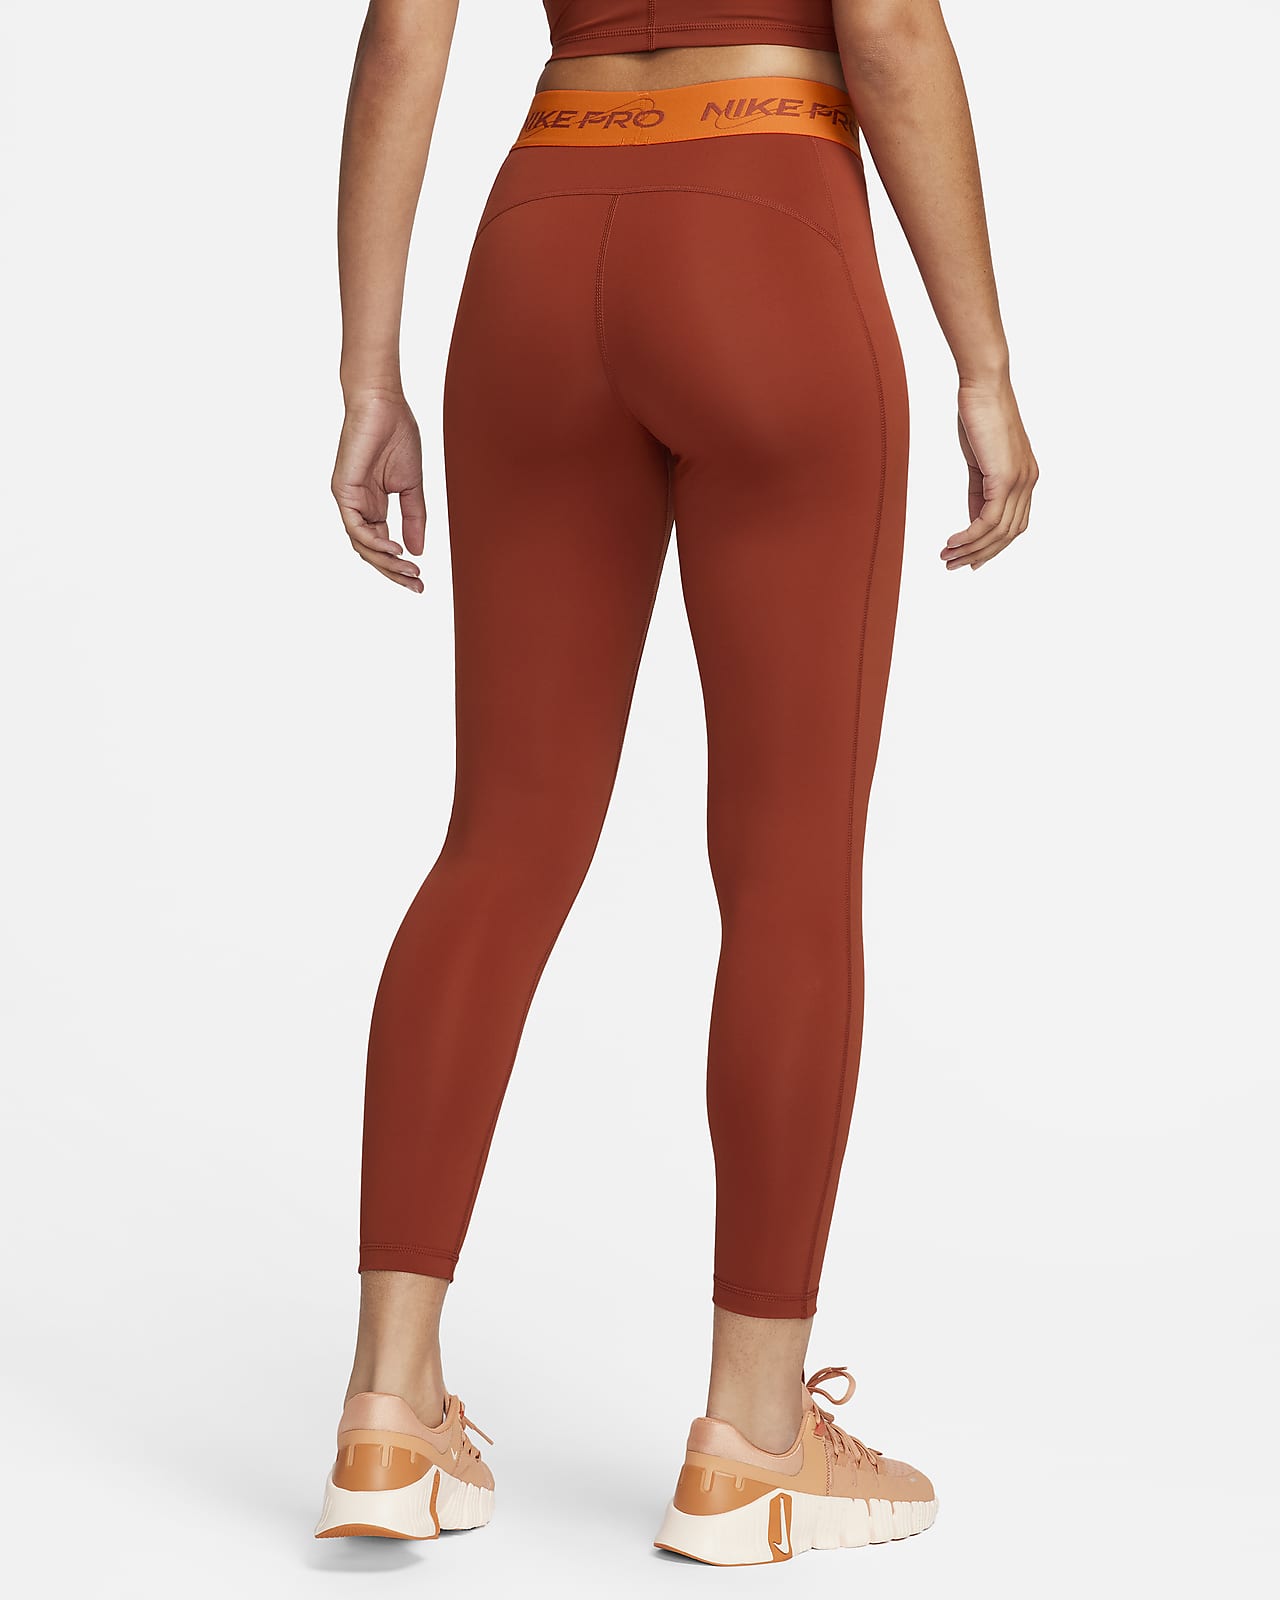 Nike Therma-FIT One Legging BANDIER, 42% OFF